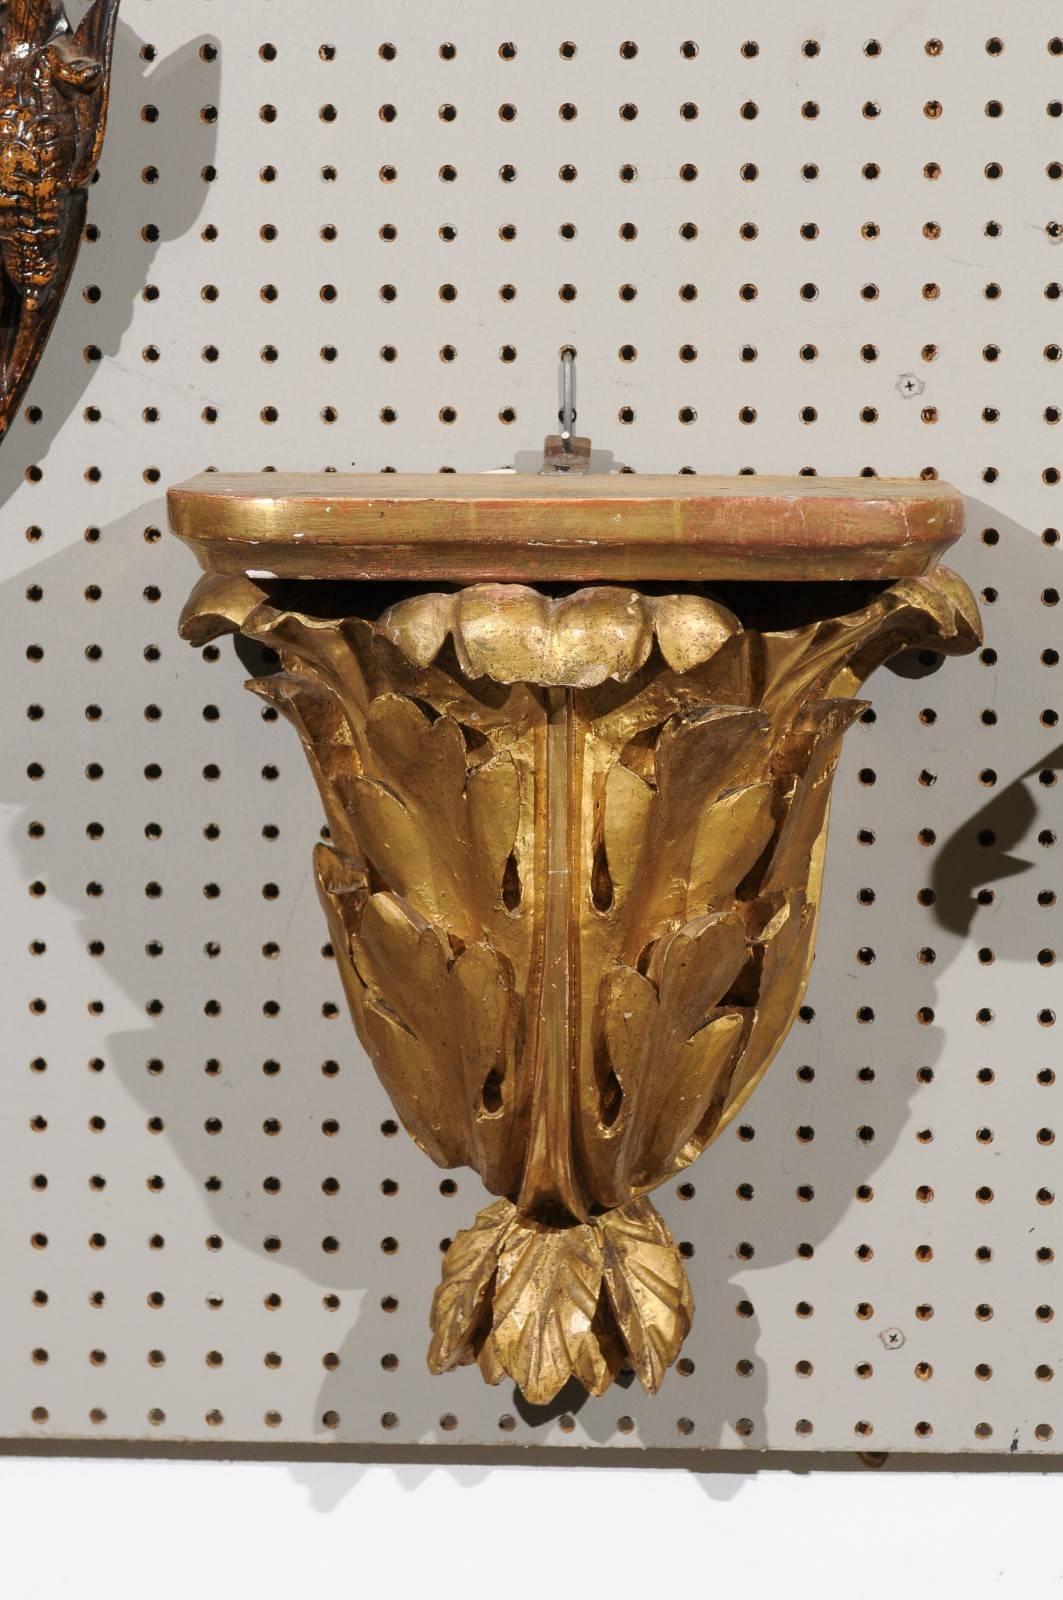 Pair of 19th century carved wood gilded brackets, circa 1890
A stunning pair of French gilded brackets adorned with large flowing acanthus leaves. Theses brackets have good depth and size that will add a beautiful architectural element to your wall.